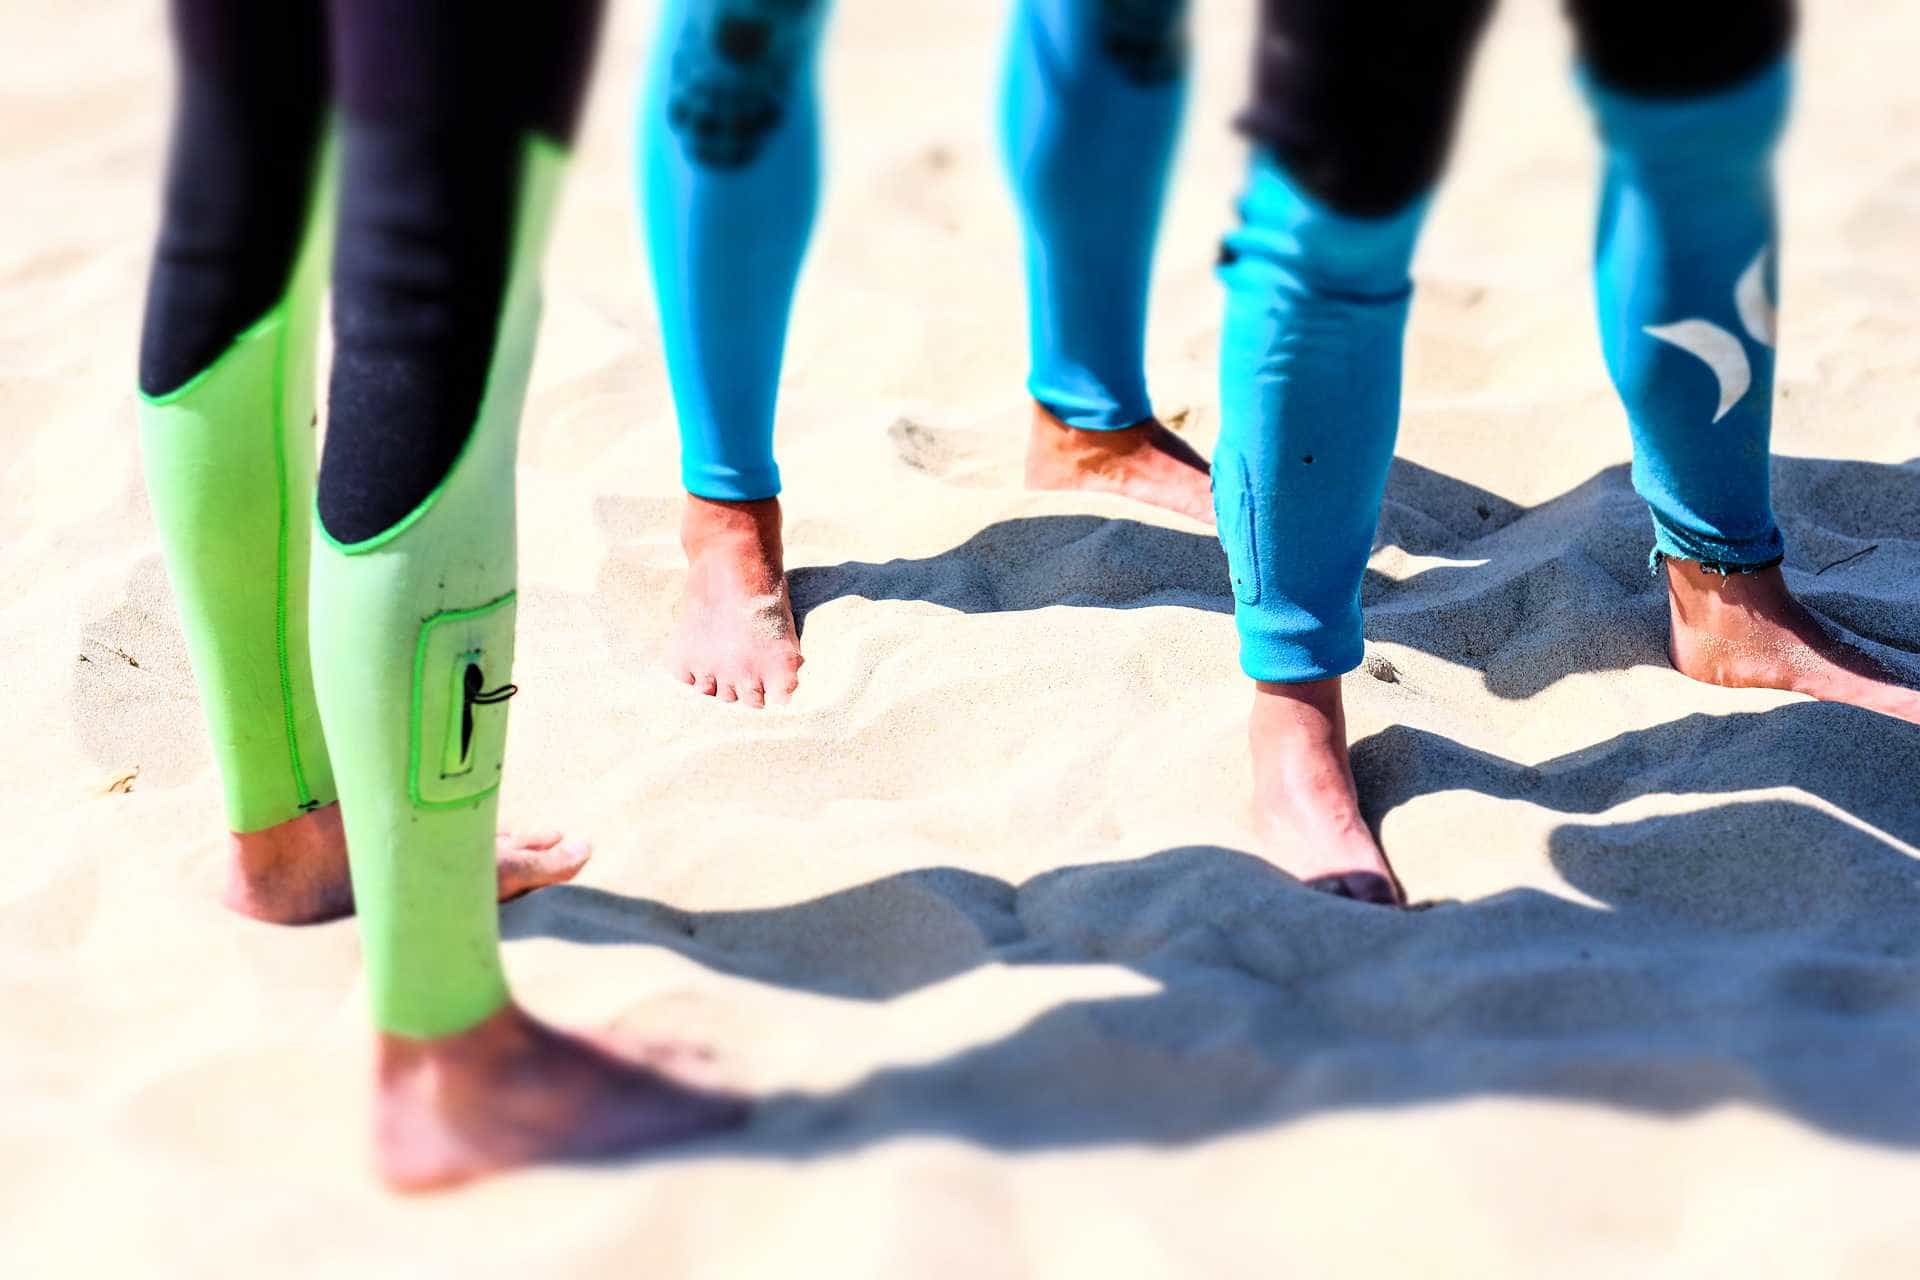 People standing on sandy beach wearing wetsuits